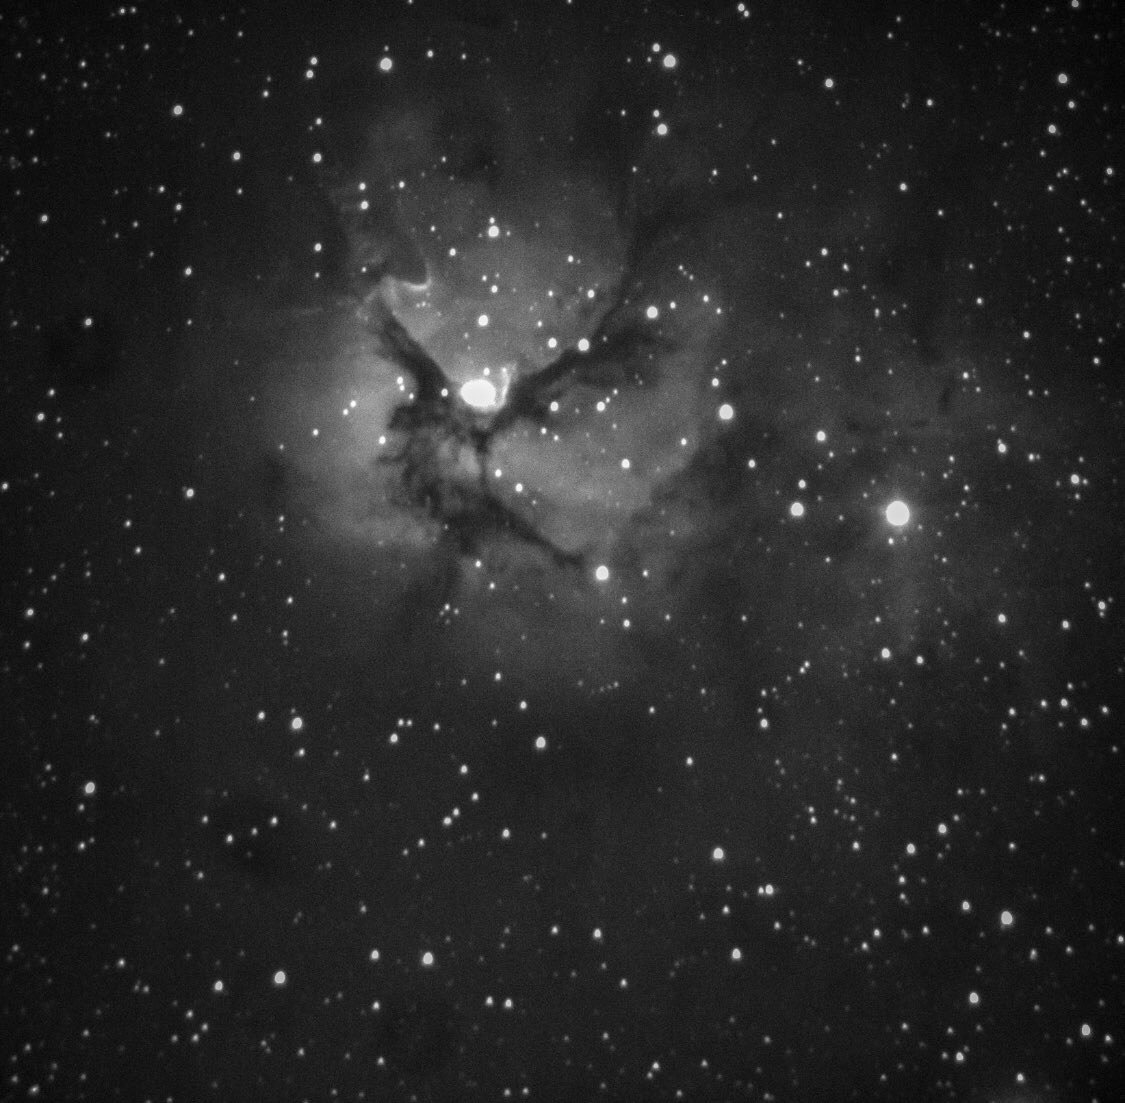 Lastly for the images, the Trifid Nebula ... or as I like to call it, tje Boogy Man Nebula ....Will miss seeing the Scorpius-Sagittarius nebulae as the begin to set in the west ...10/n